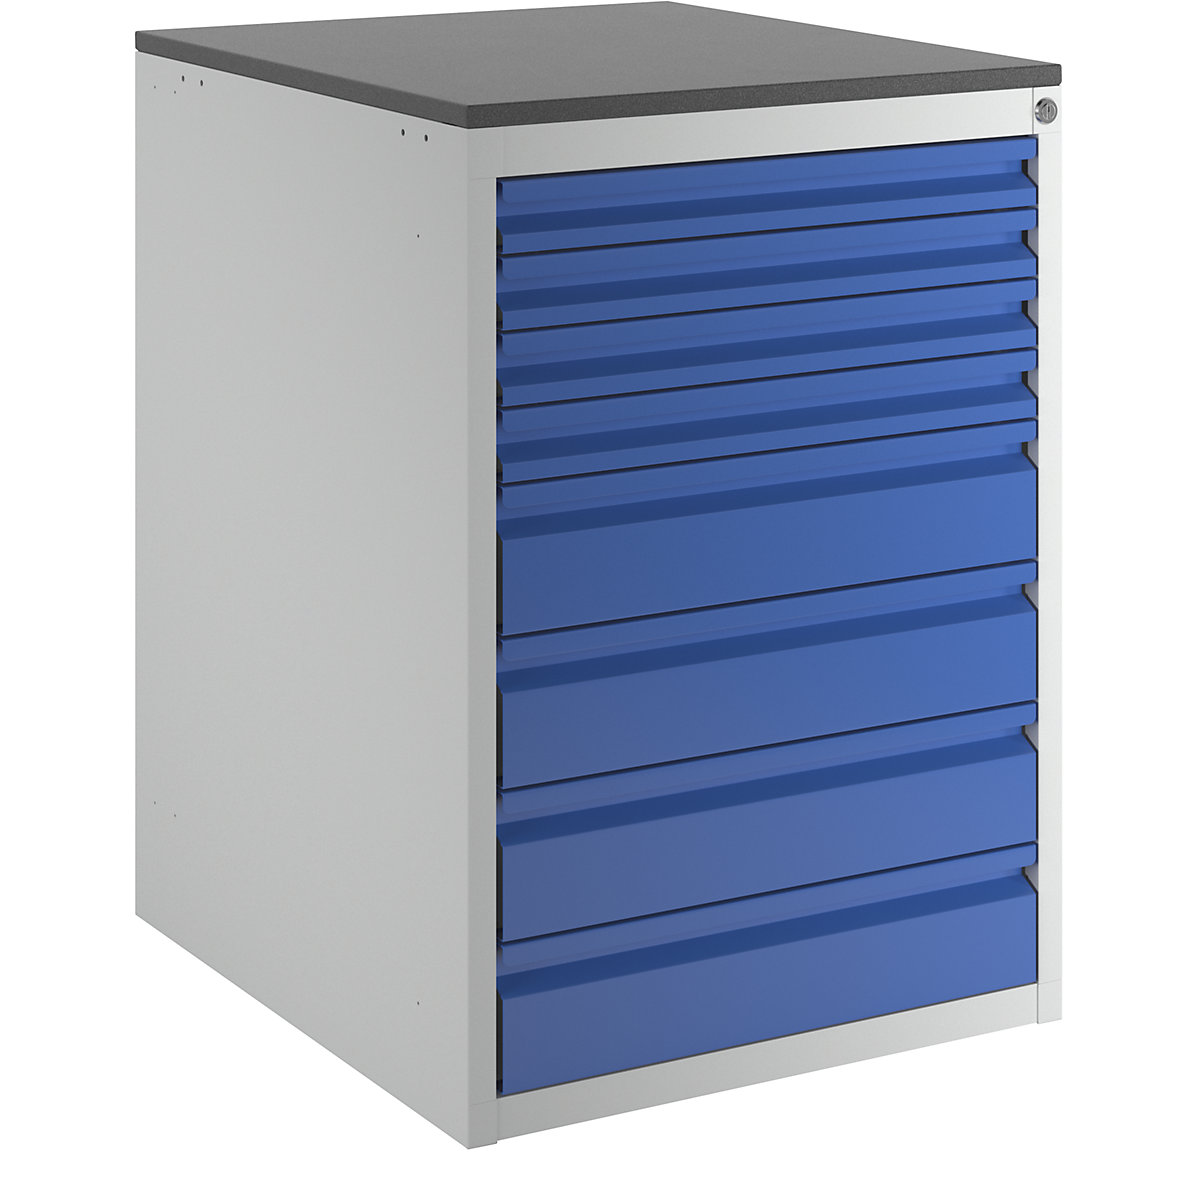 Drawer cupboard with telescopic guides – RAU, height 820 mm, drawers: 4 x 60, 4 x 120 mm, light grey / gentian blue, width 580 mm-5